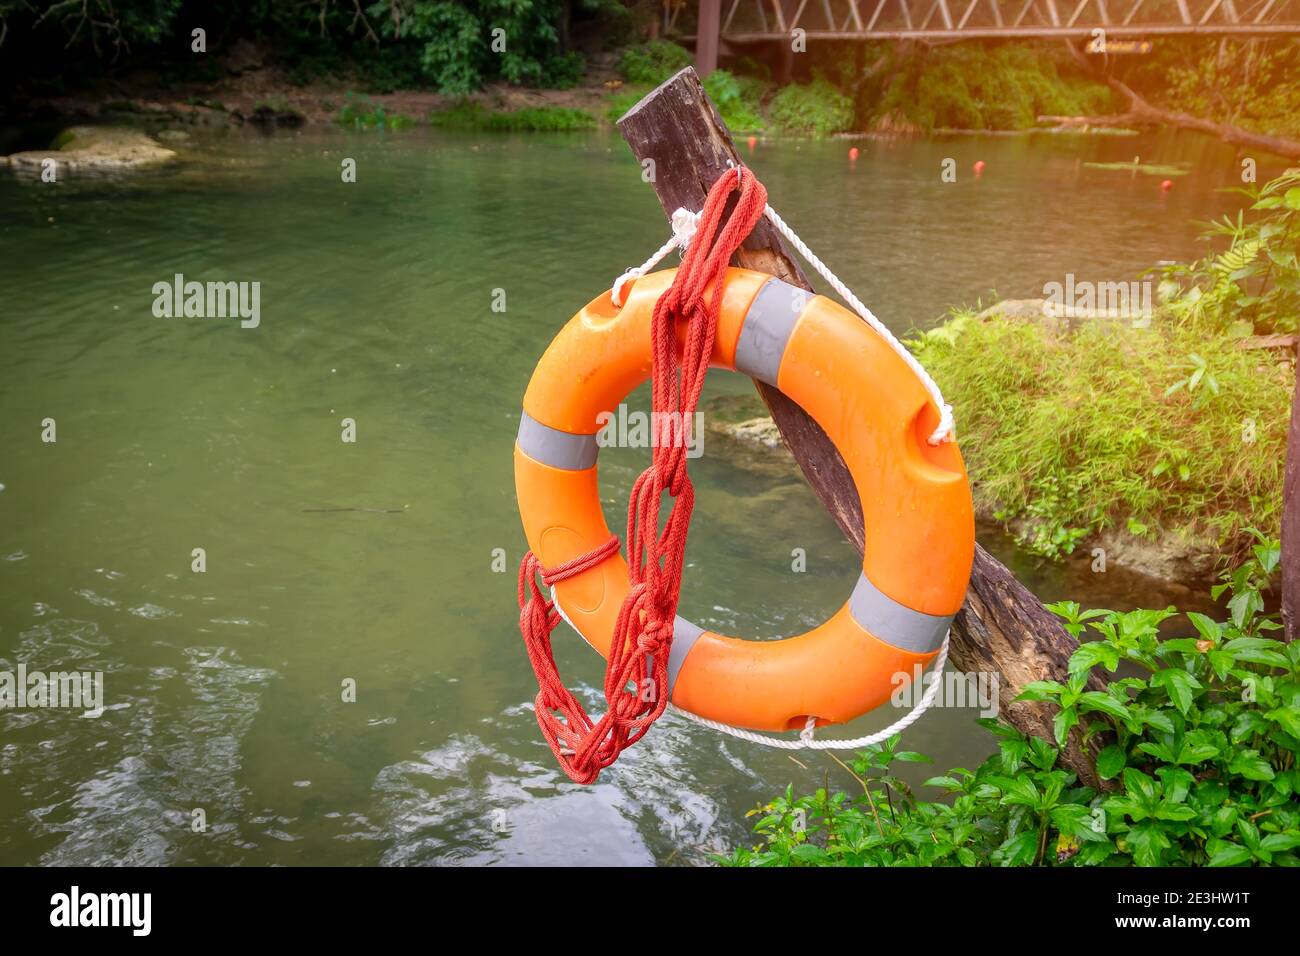 A rubber ring with a rope hanging on a wooden pole along the river was prepared for rescue. Stock Photo